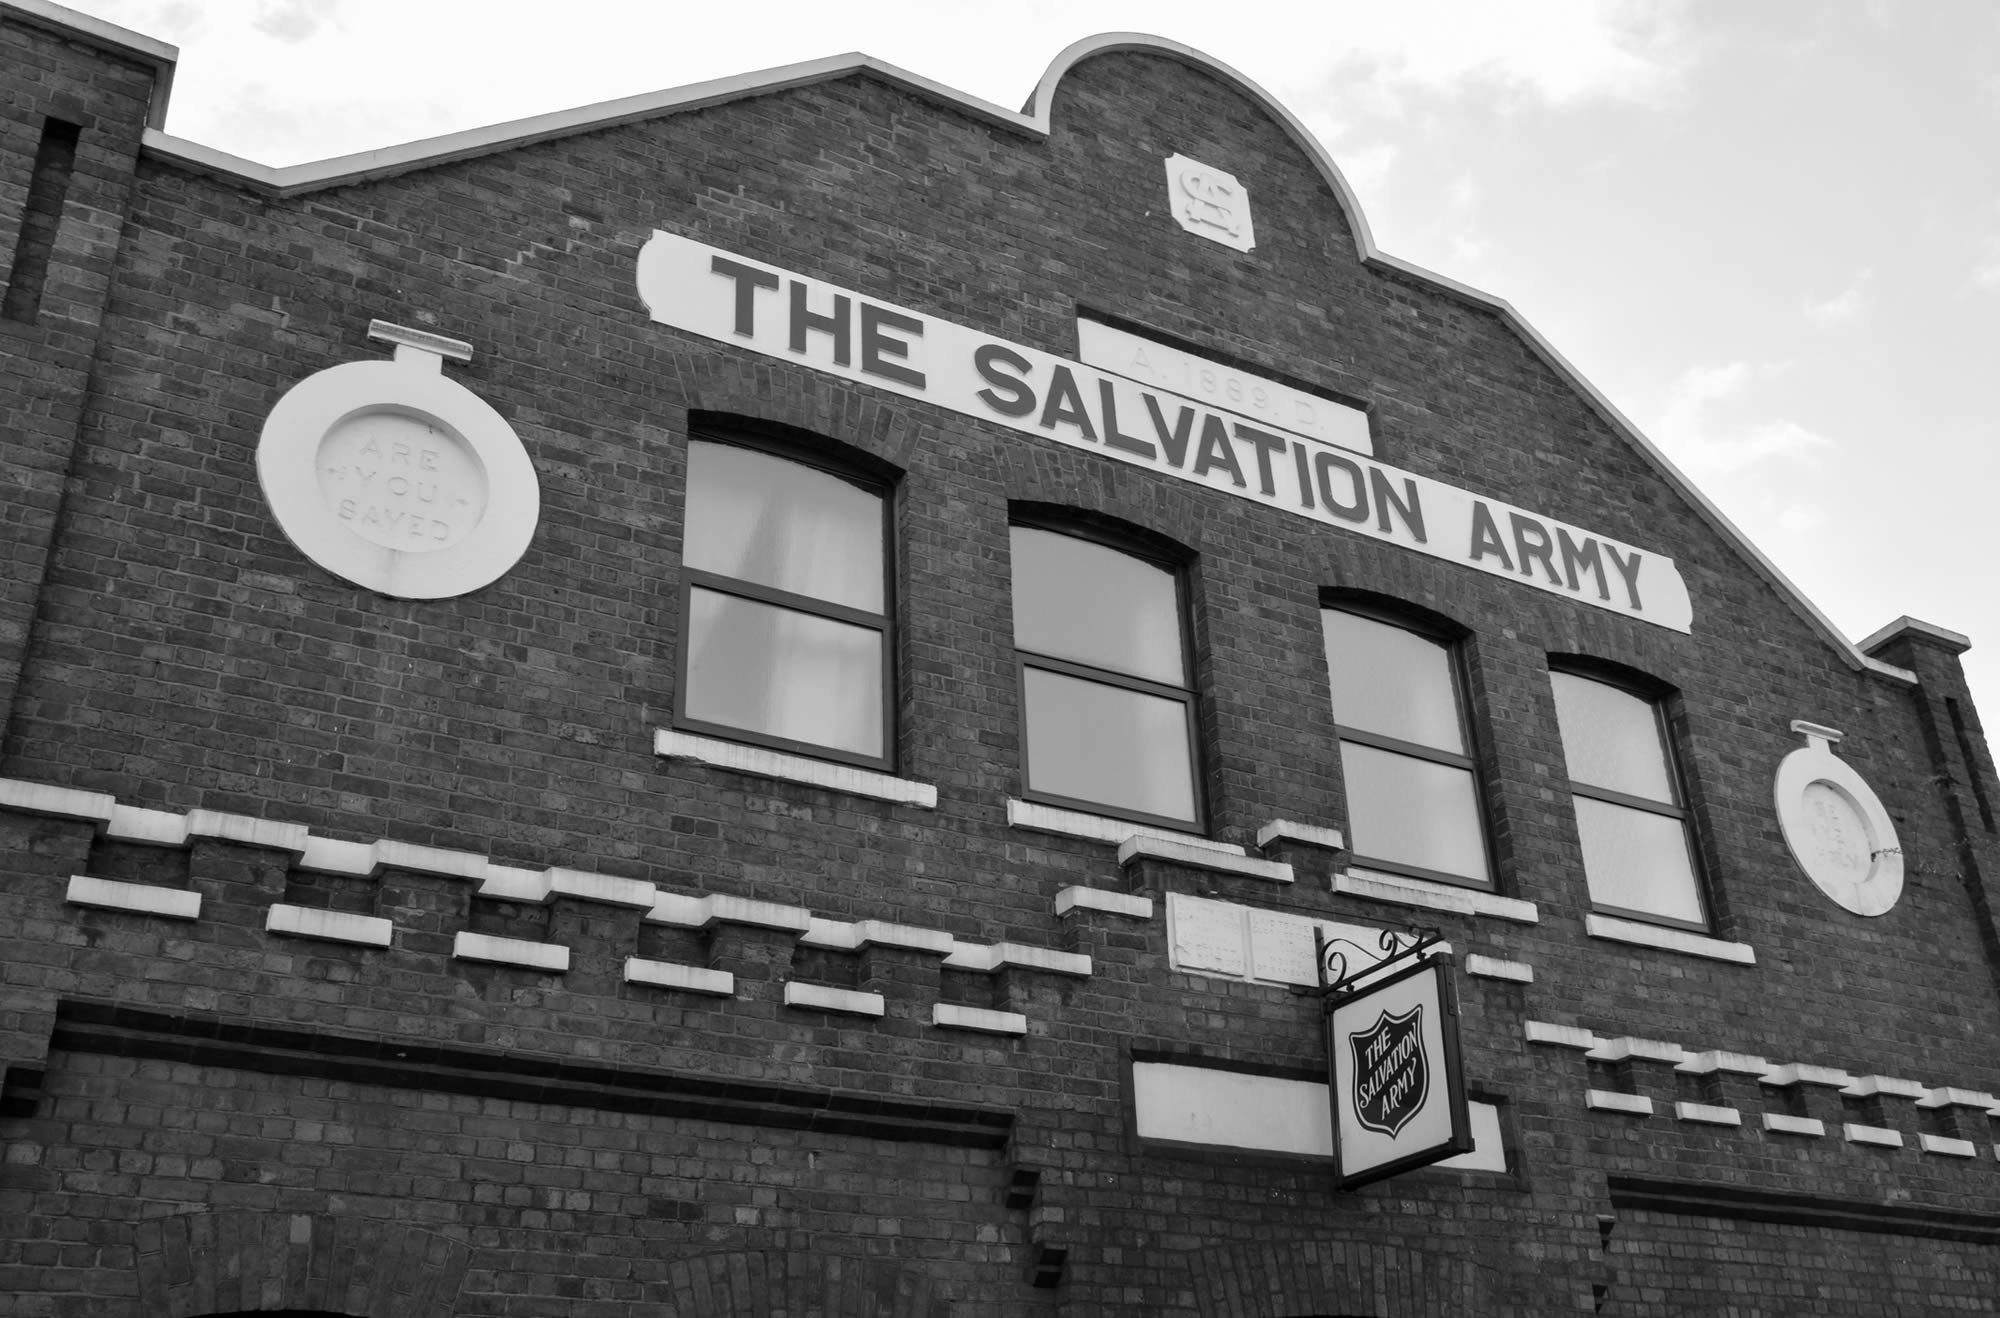 salvation-army-maternity-homes-class-action-slater-vecchio-llp